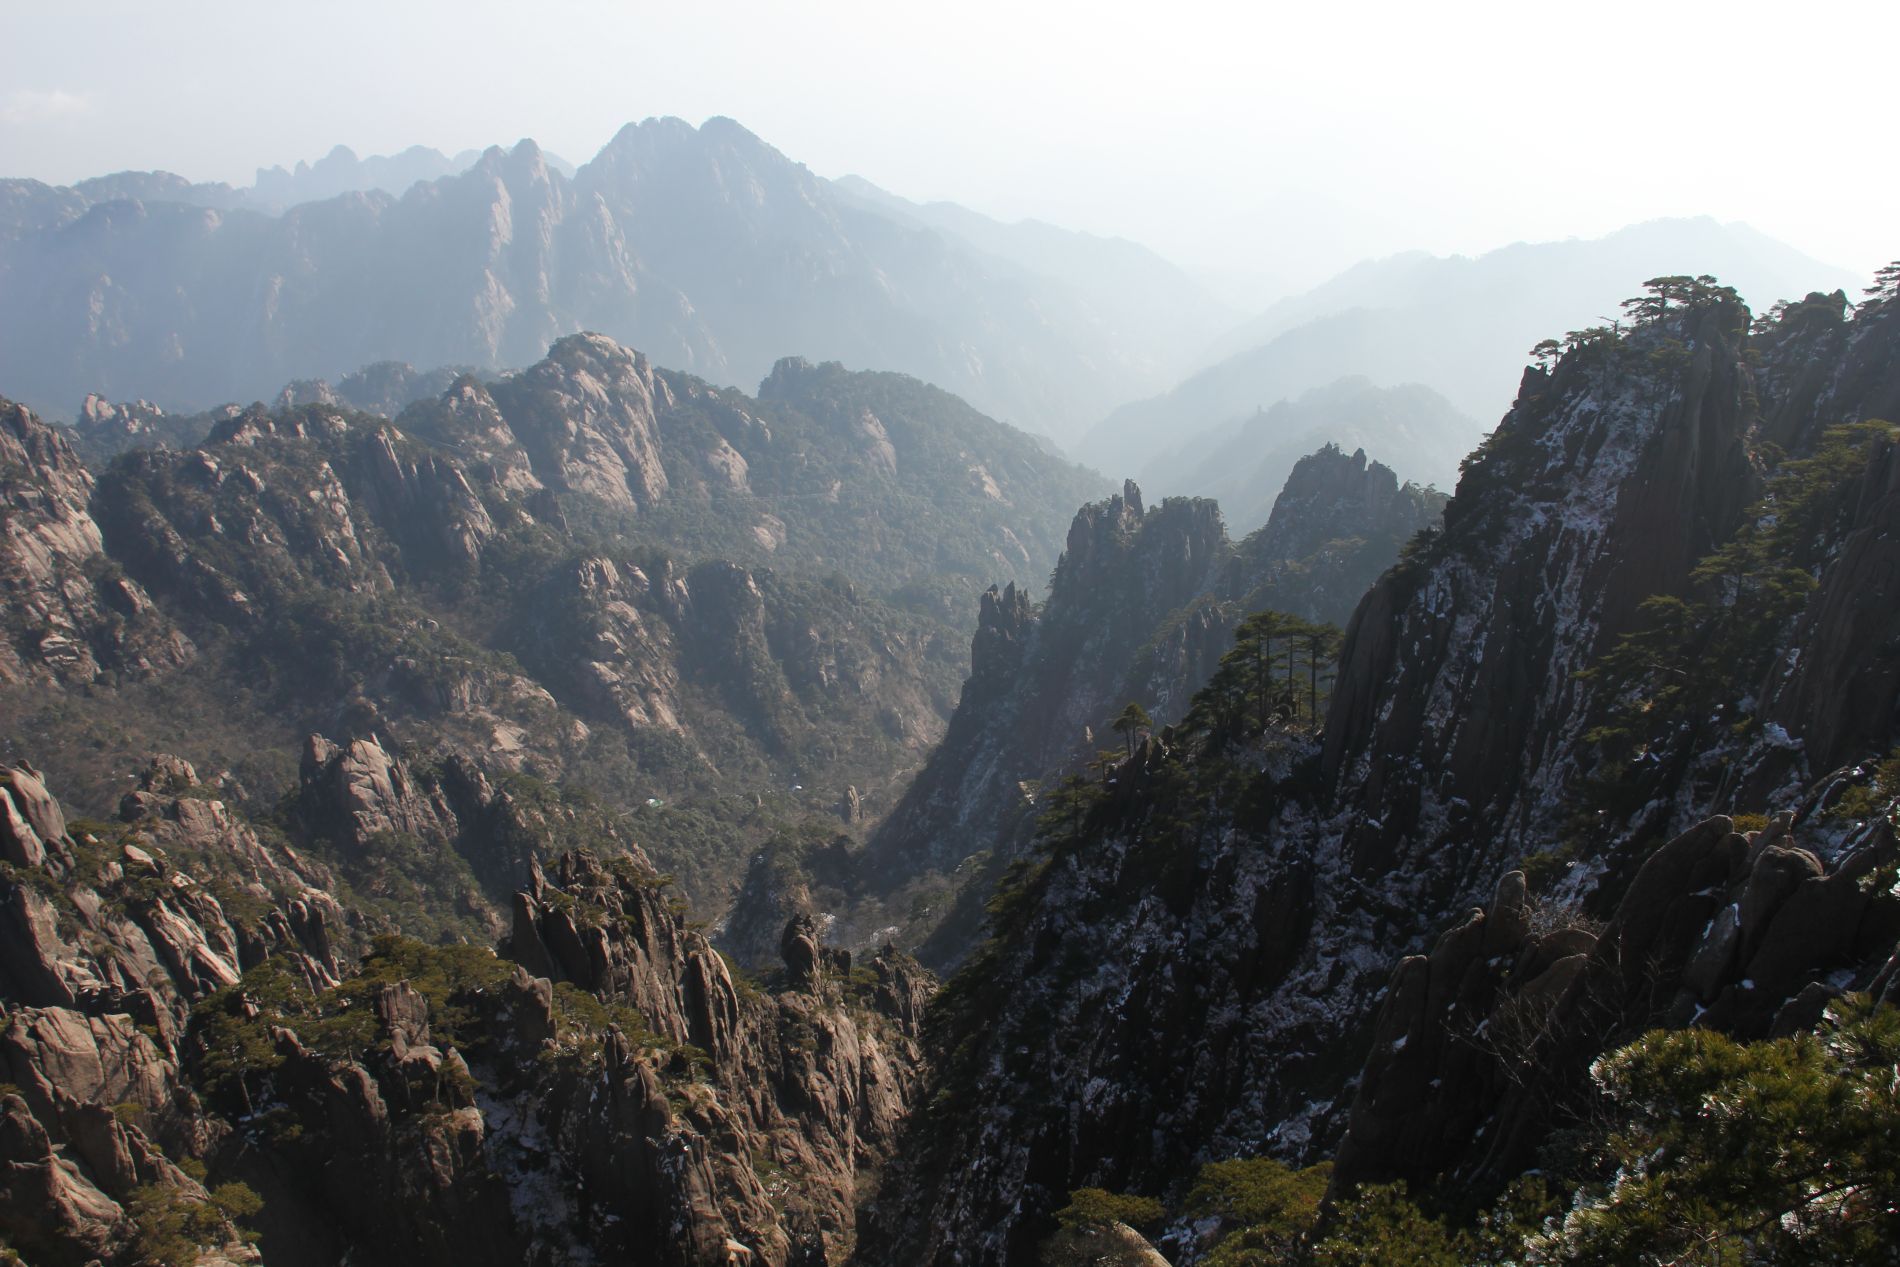 The sun shines on a particularly beautiful day on Huangshan's Bright Summit.